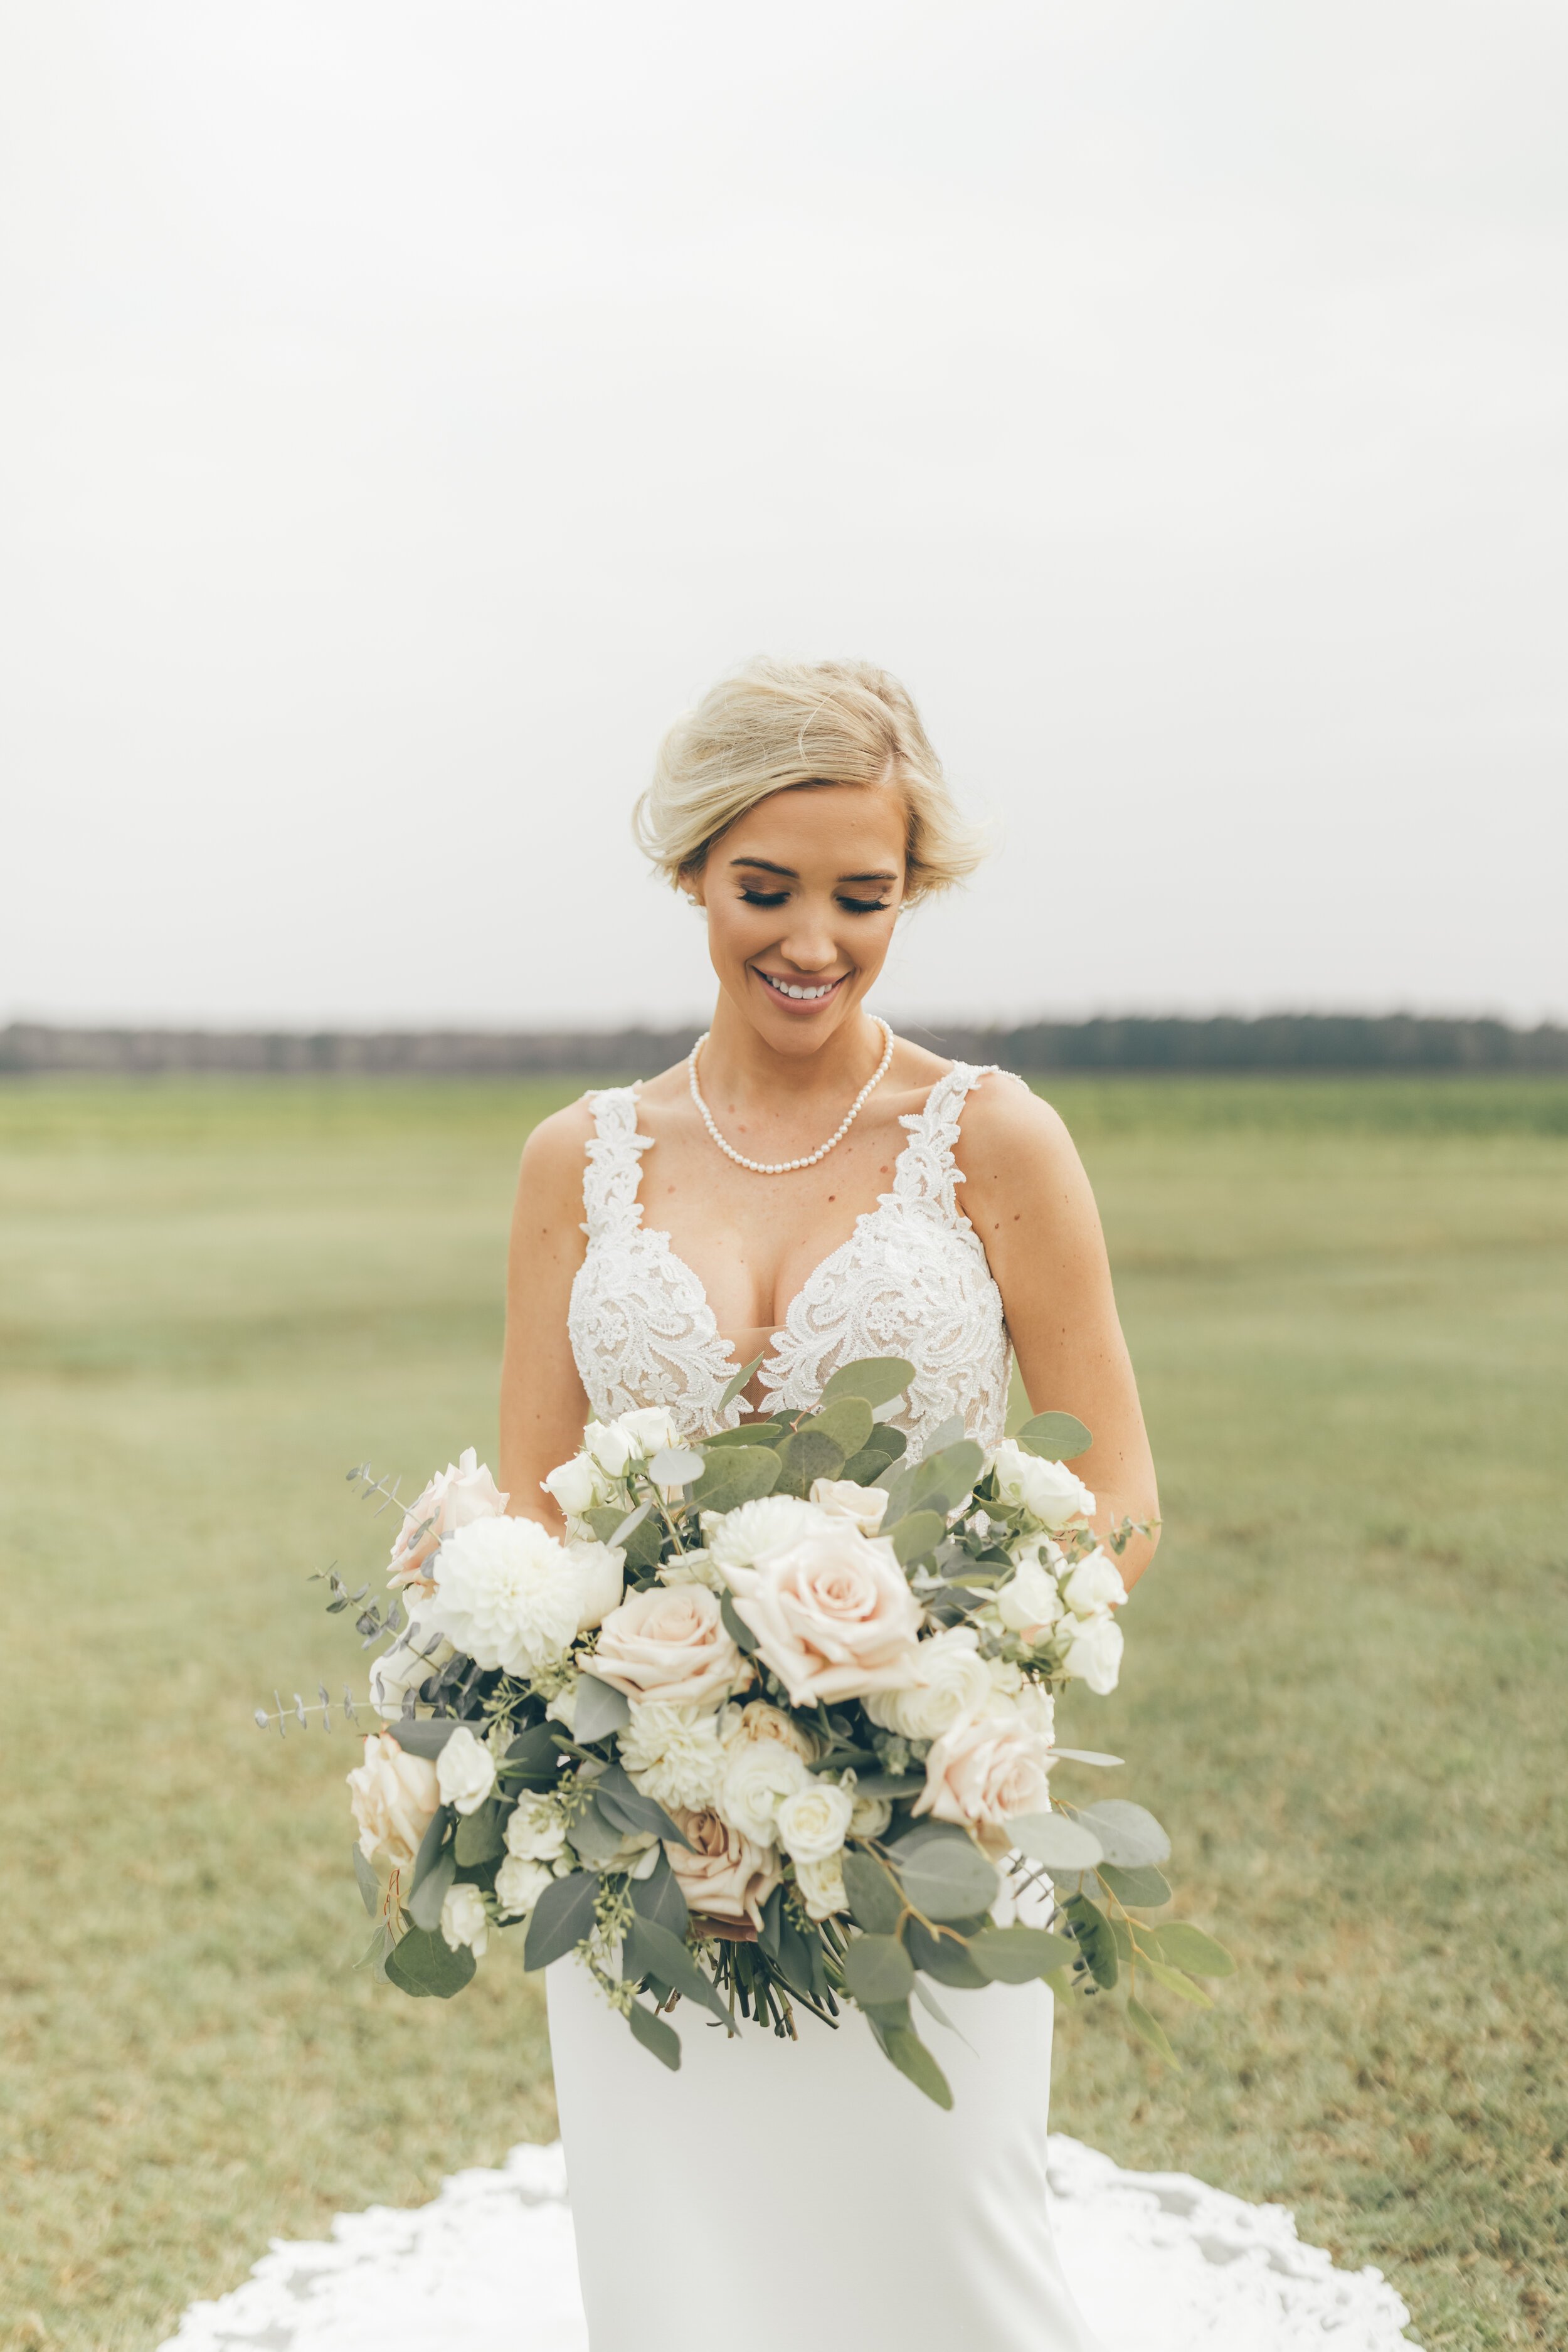 ivory-and-beau-bride-and-florals-real-bride-real-wedding-blog-wedding-dress-bridal-gown-wedding-gown-wedding-flowers-savannah-florist-wedding-florist-maggie-sottero-wedding-dress-organic-natural-wedding-Griffin_0231.jpg